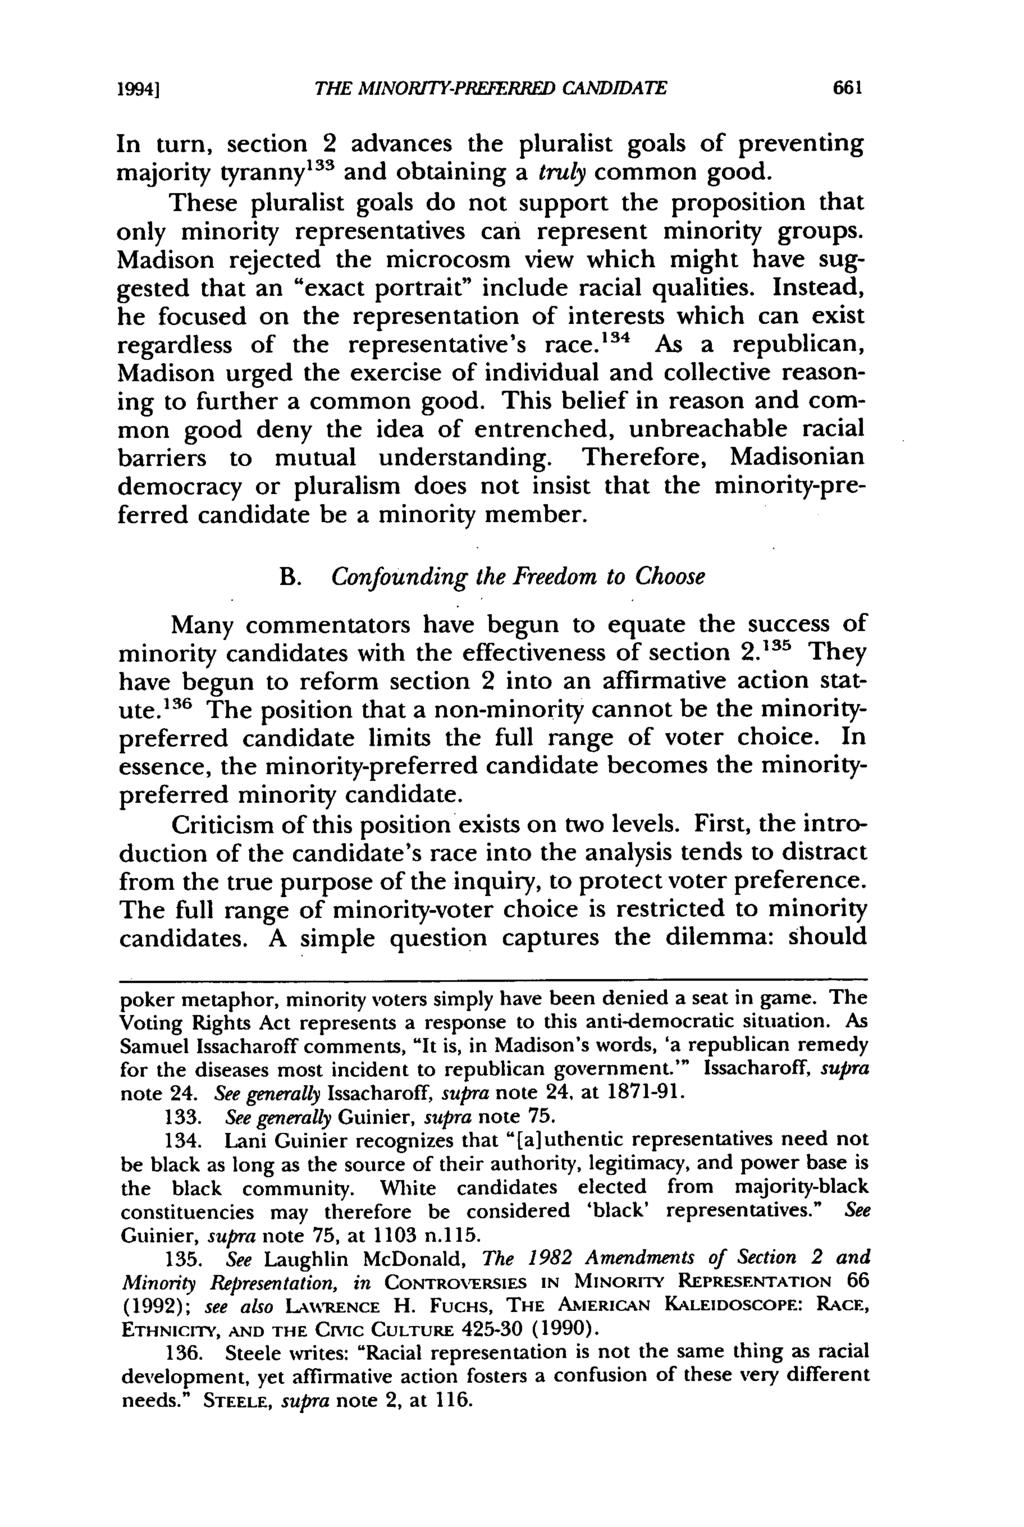 1994] THE MINORTY-PREFERRED CANDIDATE In turn, section 2 advances the pluralist goals of preventing majority tyranny 133 and obtaining a truly common good.